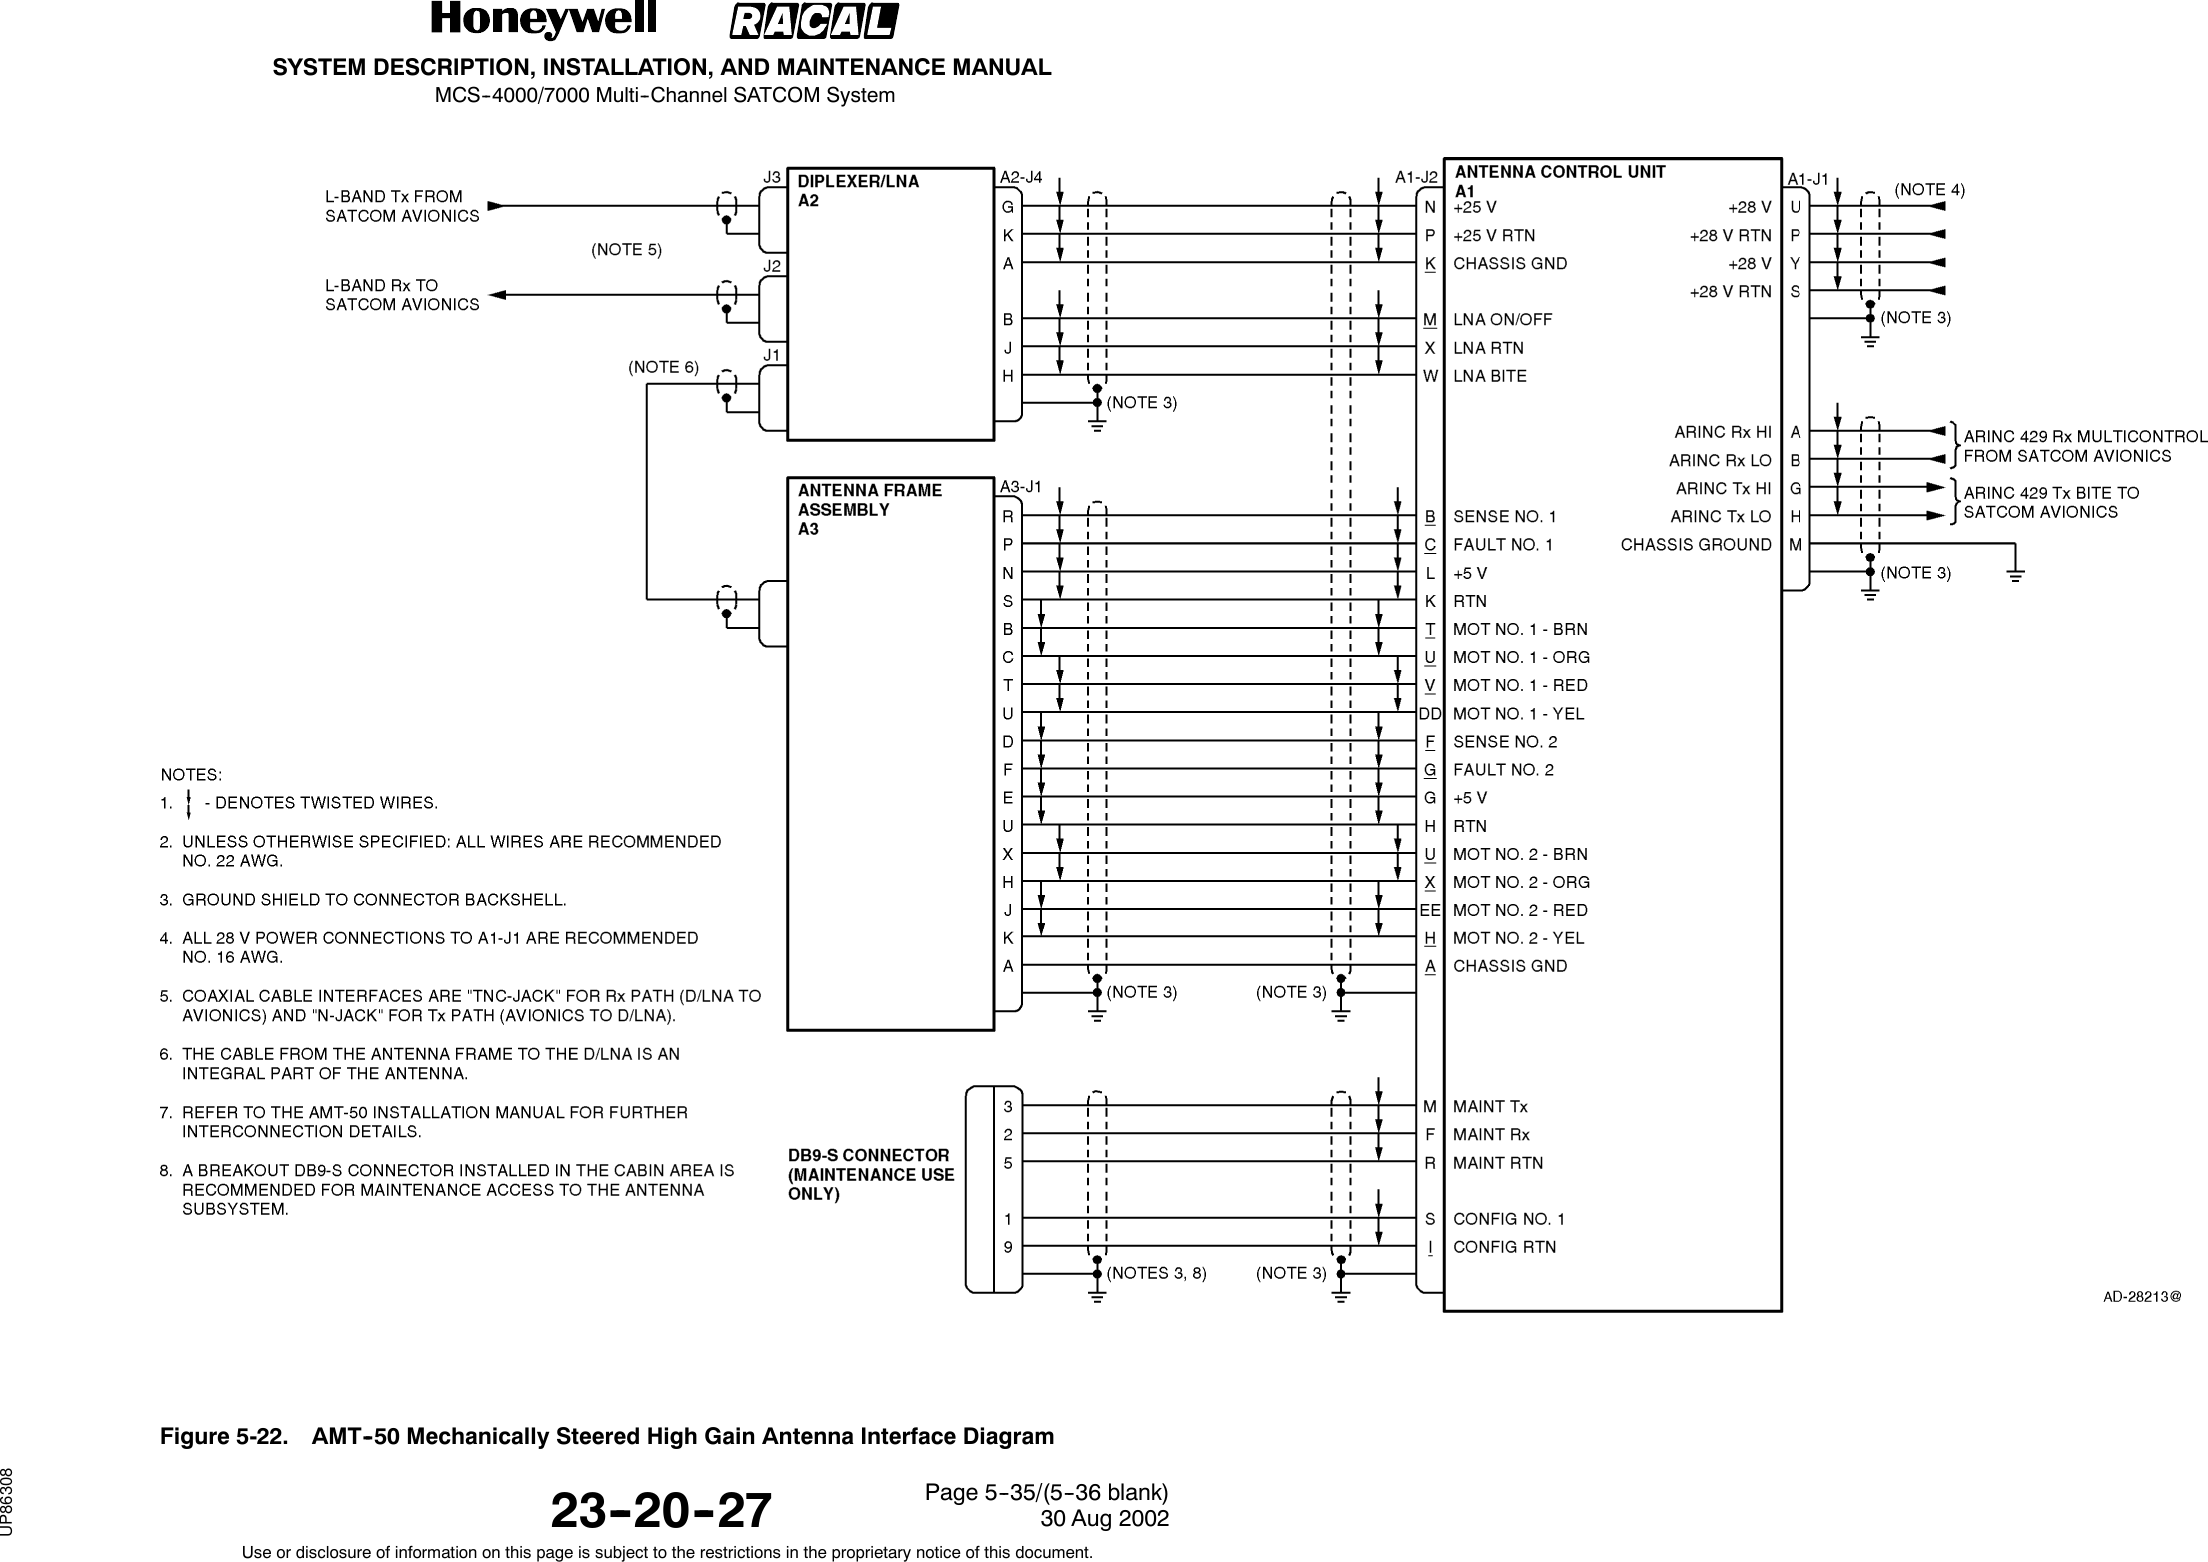 SYSTEM DESCRIPTION, INSTALLATION, AND MAINTENANCE MANUALMCS--4000/7000 Multi--Channel SATCOM System23--20--2730 Aug 2002Use or disclosure of information on this page is subject to the restrictions in the proprietary notice of this document.Page 5--35/(5--36 blank)Figure 5-22. AMT--50 Mechanically Steered High Gain Antenna Interface DiagramRELEASED FOR THE EXCLUSIVE USE BY: HONEYWELL INTERNATIONALUP86308